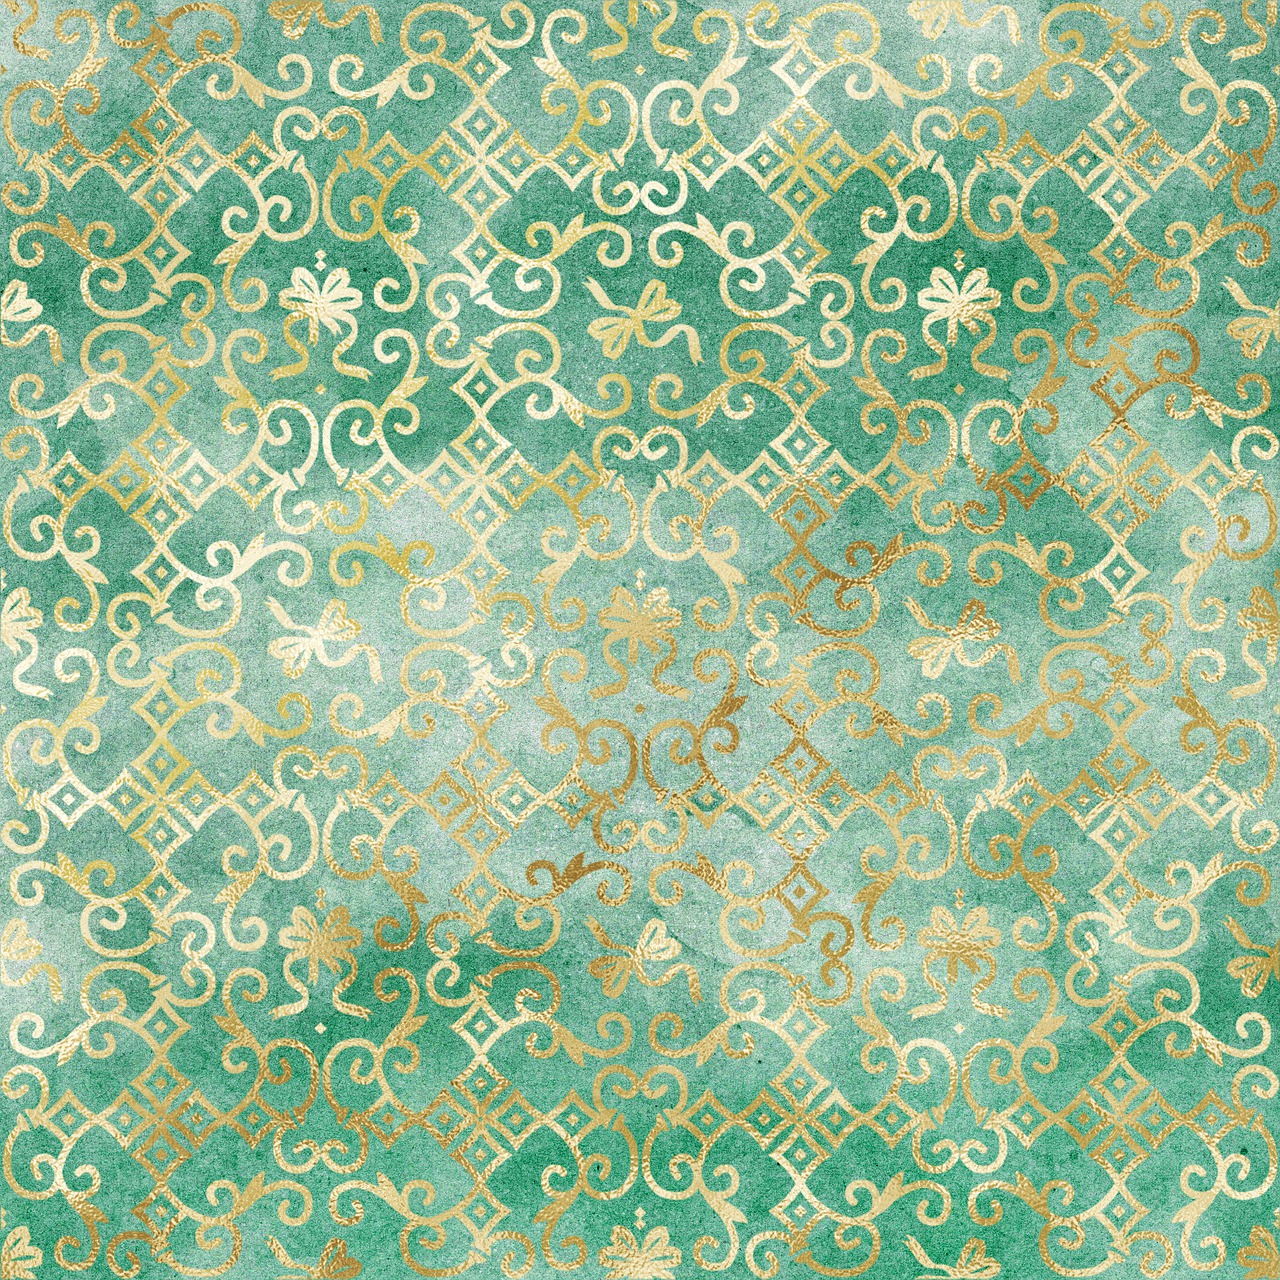 a green and gold wallpaper with ornate designs, a digital rendering, inspired by Yanagawa Nobusada, aquamarine windows, watercolor background, lattice, delicate garden on paper